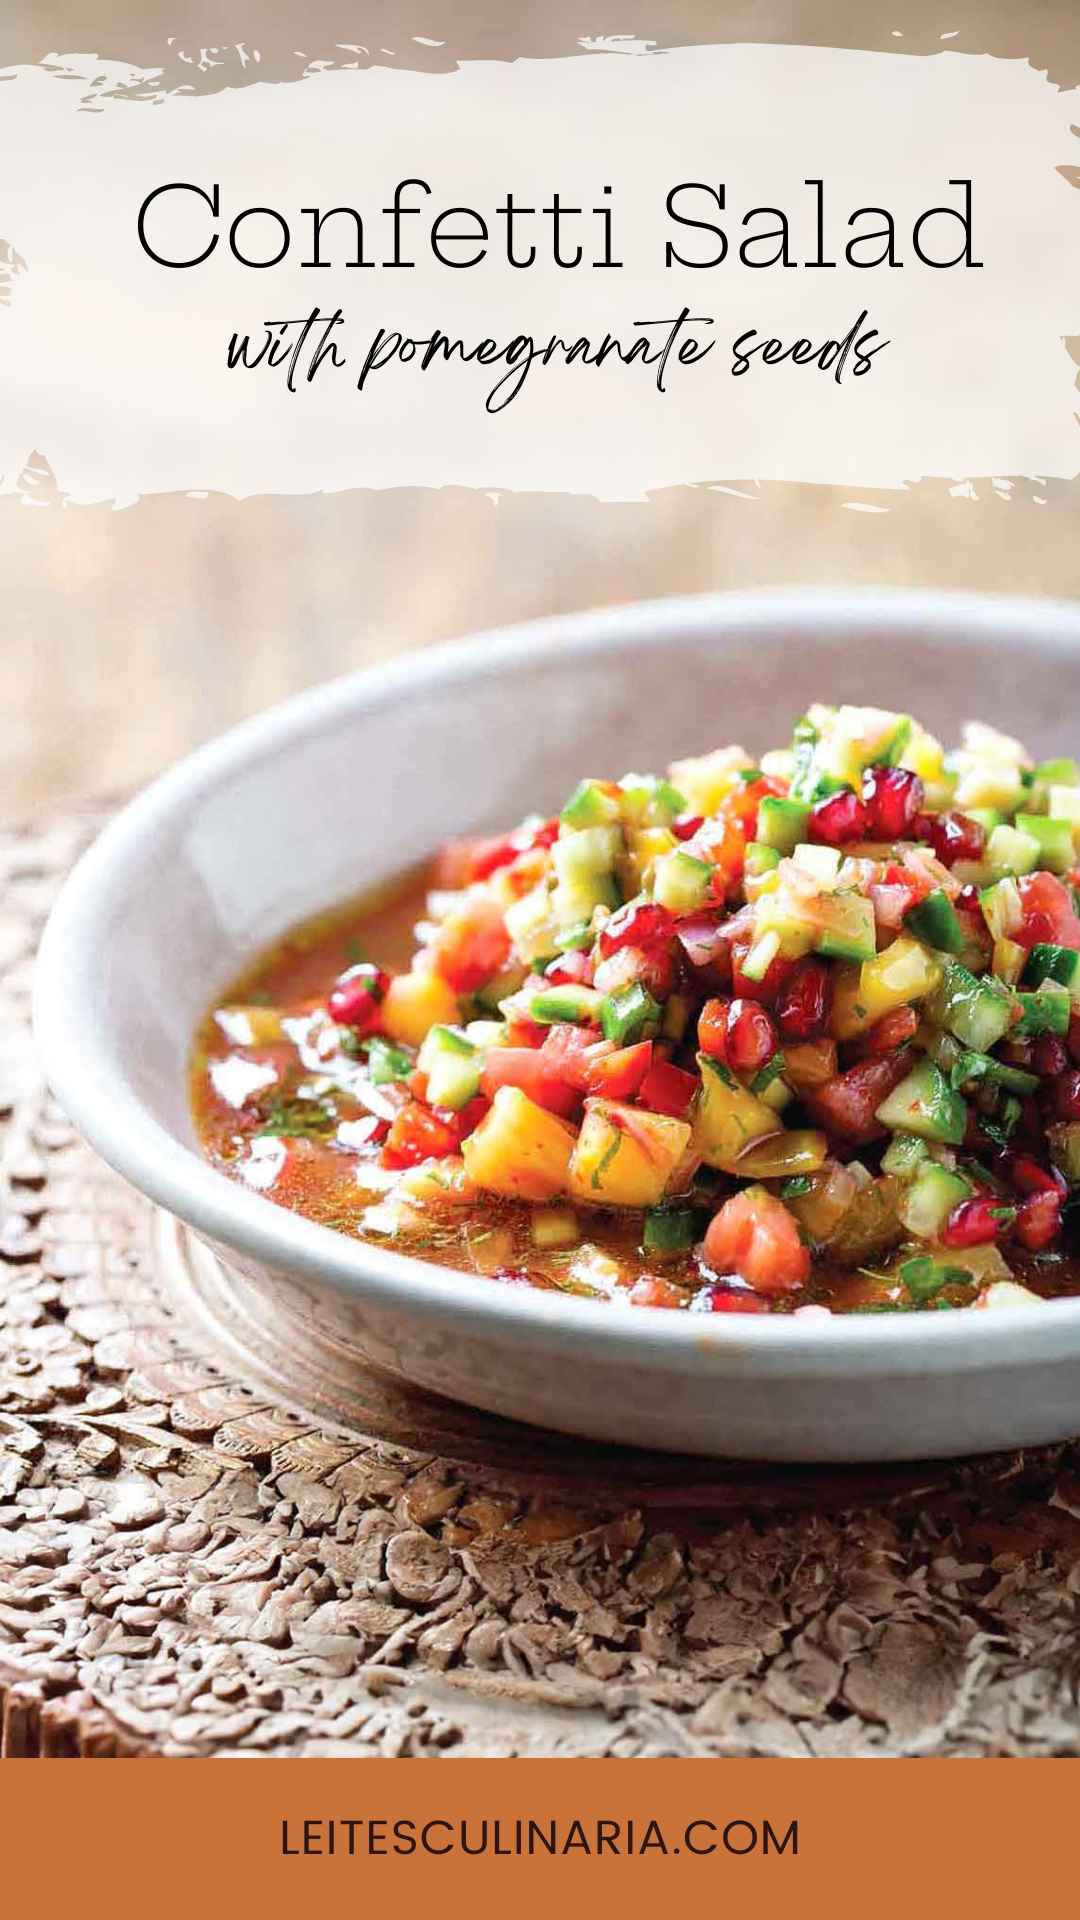 A white bowl filled with chopped vegetable salad with pomegranate seeds scattered on top.